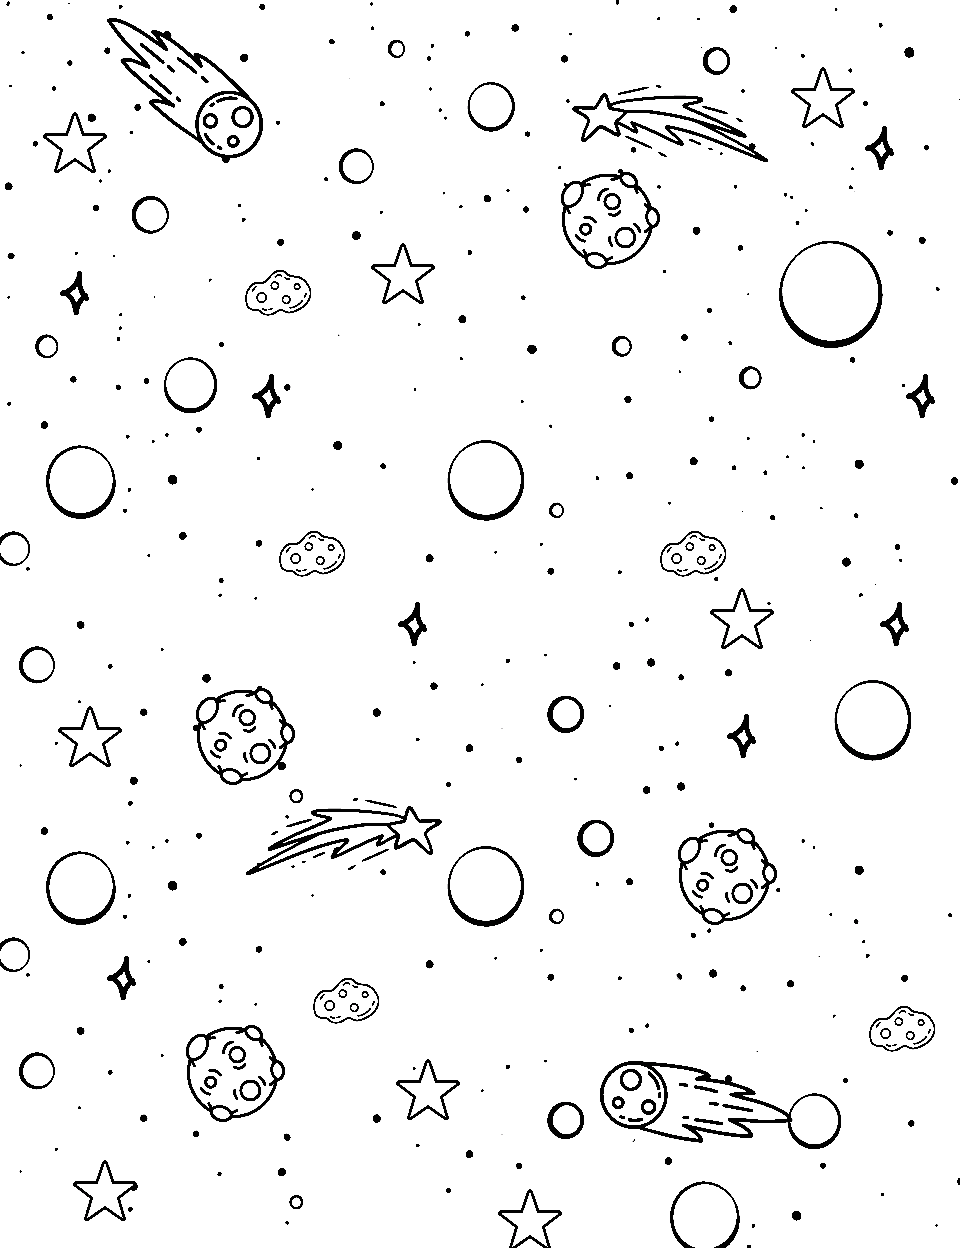 Milky Way Marvel Coloring Page - A stretch of our Milky Way galaxy with countless stars.